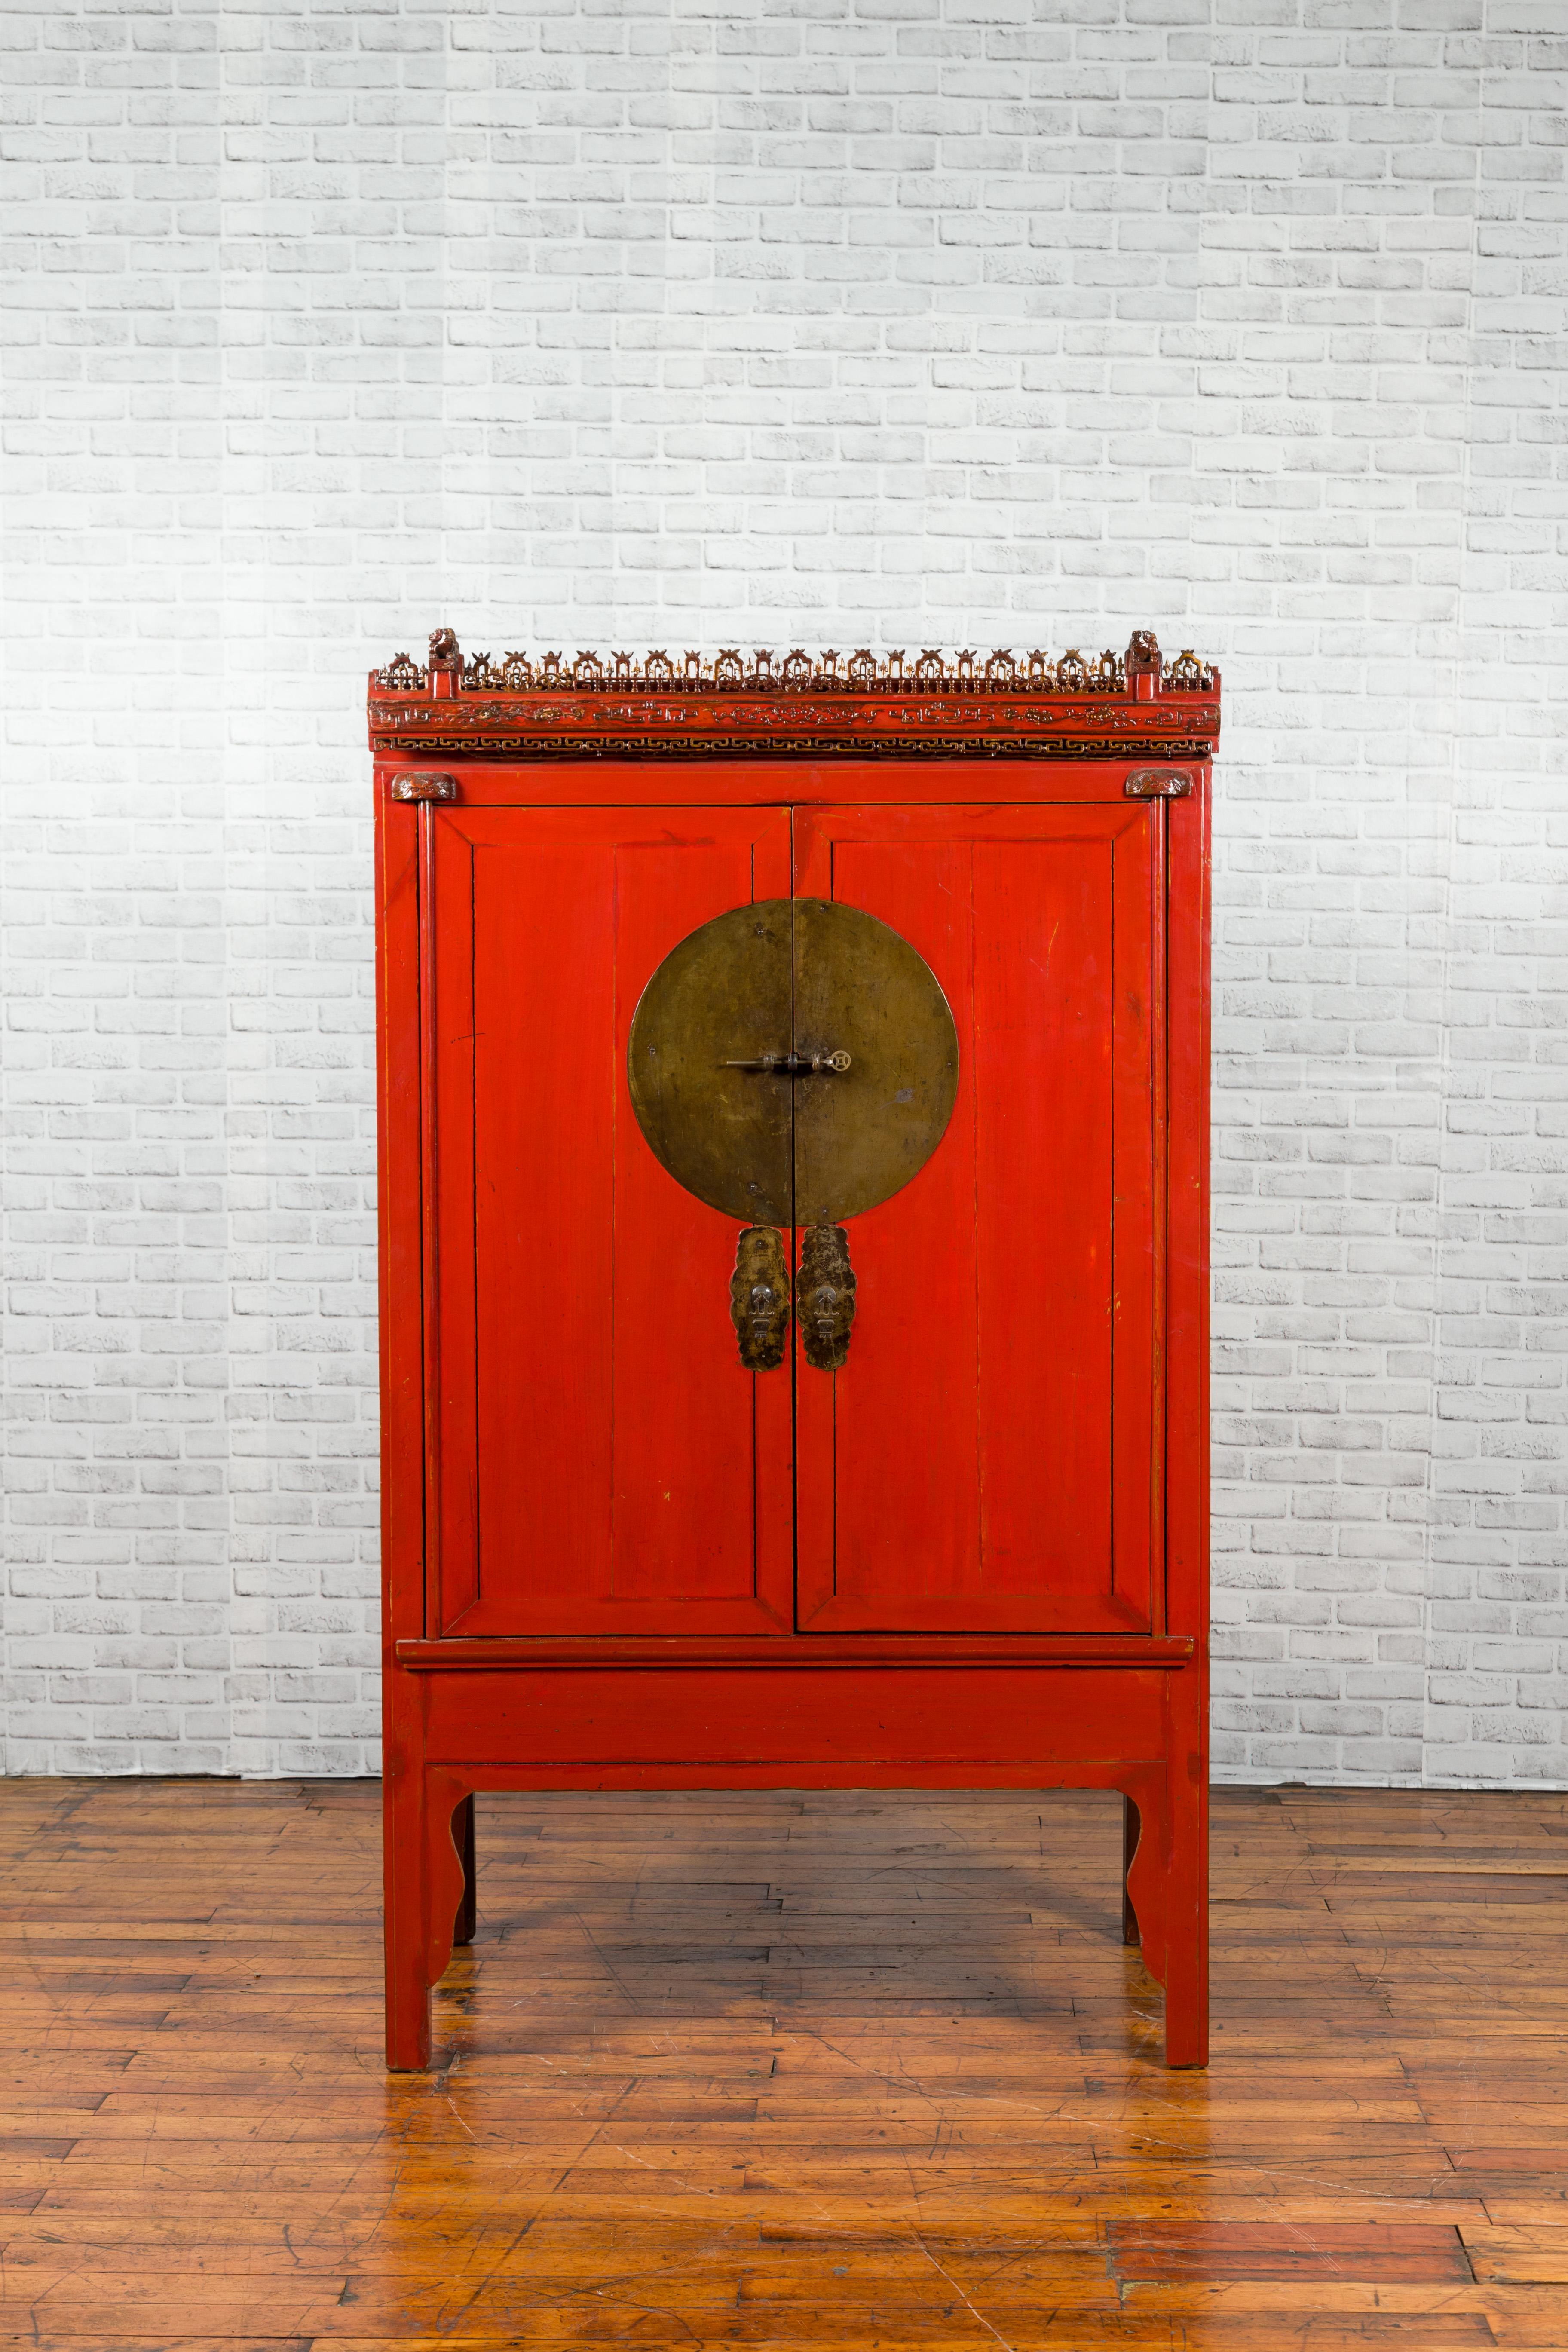 A Chinese Qing Dynasty period red lacquered wedding cabinet from the 19th century, with carved cornice. Created in China during the Qing Dynasty, this red lacquered cabinet features two simple doors opening thanks to a large brass medallion to